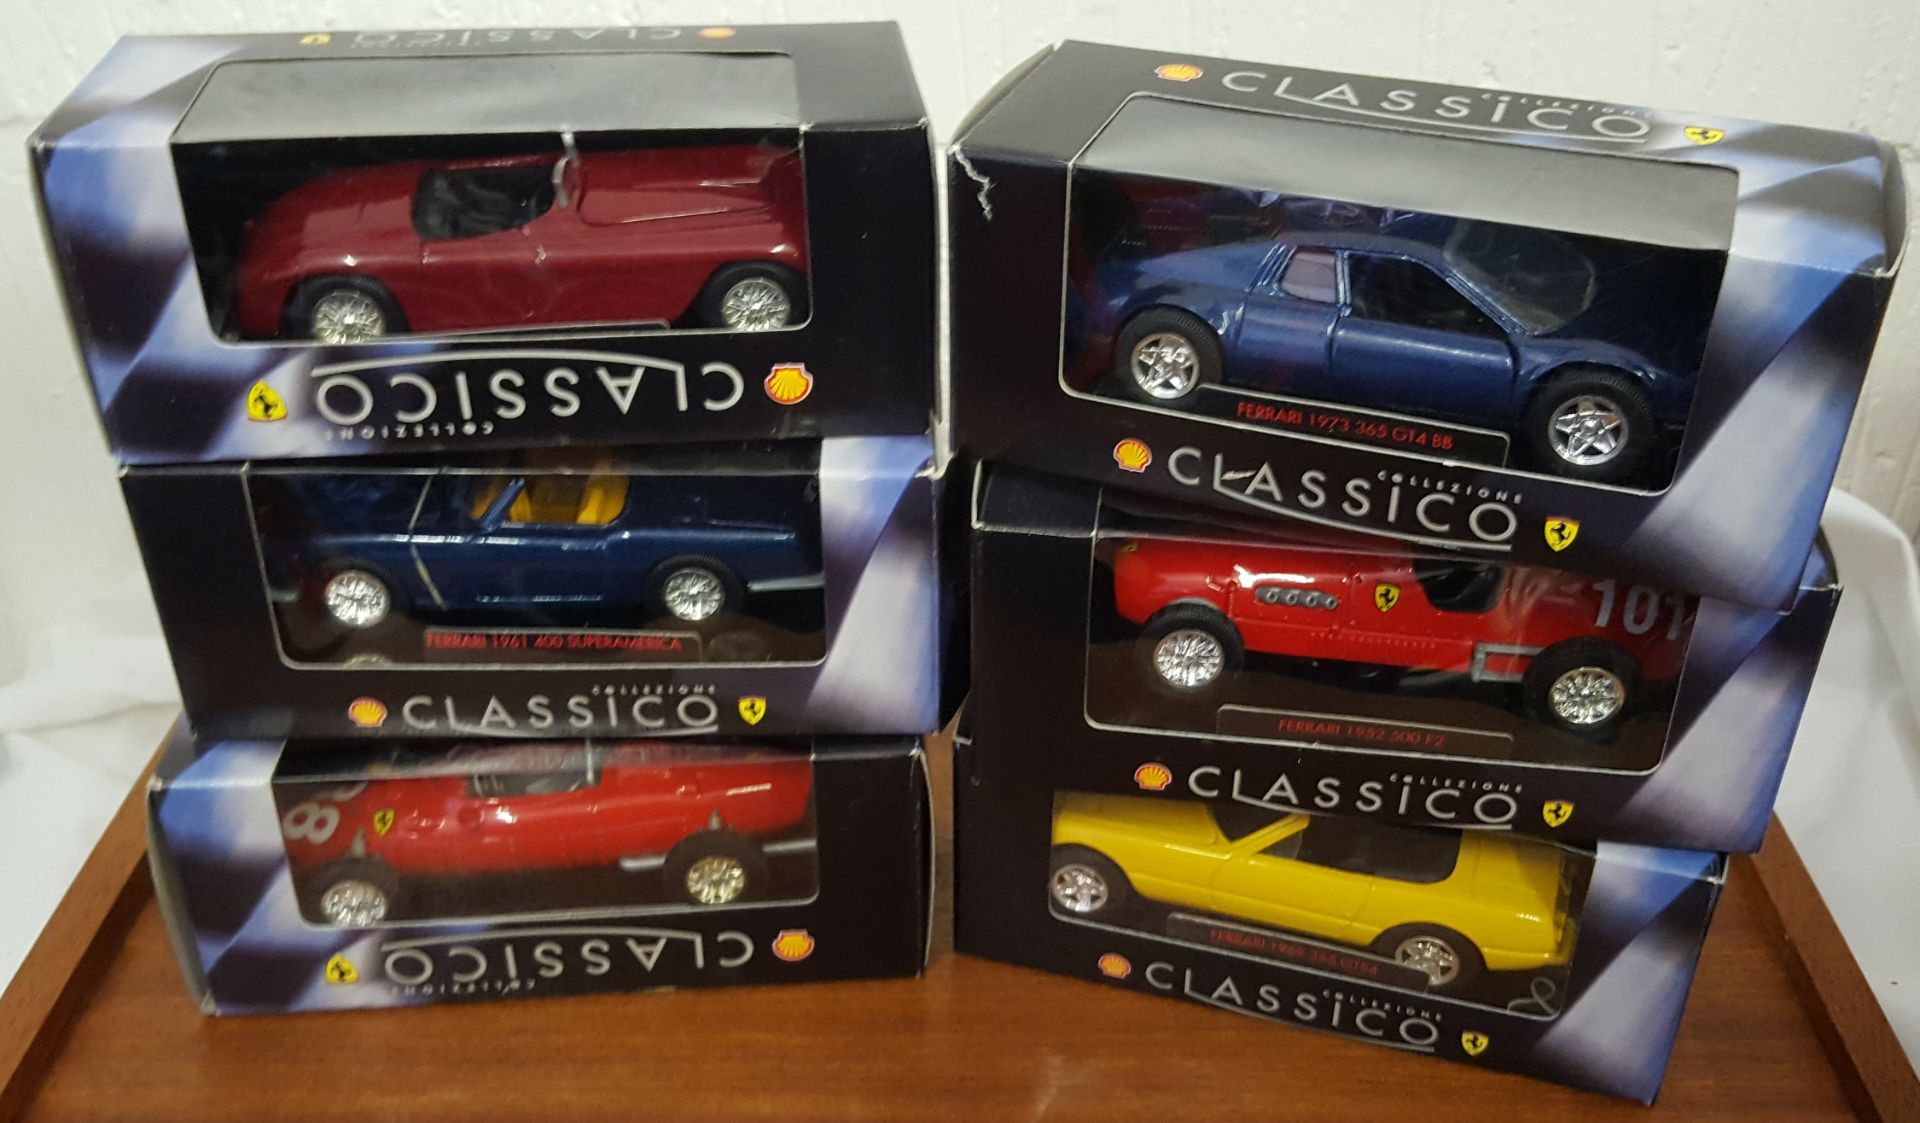 6 x Vintage Retro Collectable Classico Die Cast Toy Cars Boxed